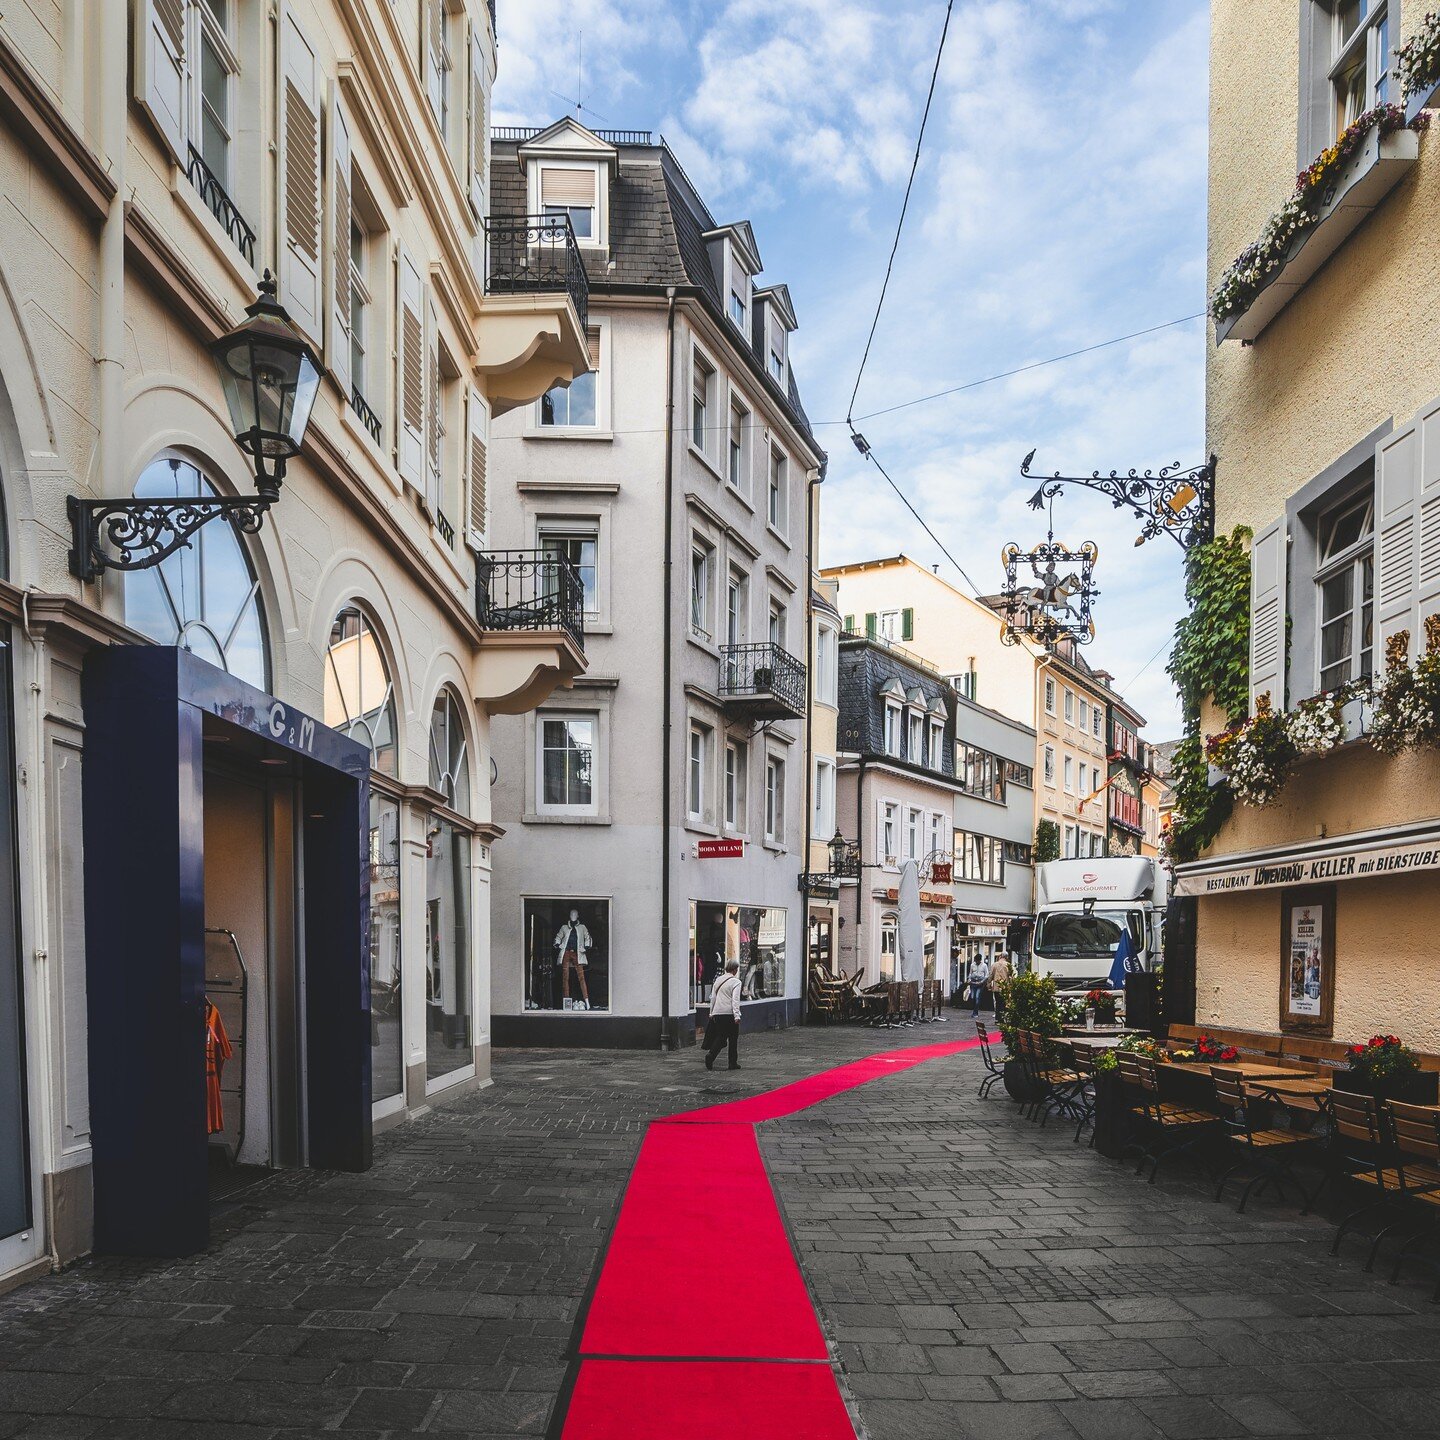 Forget the Lumiere Theatre Red Carpet. We're rolling out the PJ Party Tapis Rouge! ;-) 🛌 . #Cannes #RedCarpet #TapisRouge #PajamaParty #CannesPJParty #PJParty #PJPartyCannes #Cannes2023 #VIPNight #PajamaAffair #CozyCelebration #CannesCulte #CannesYo